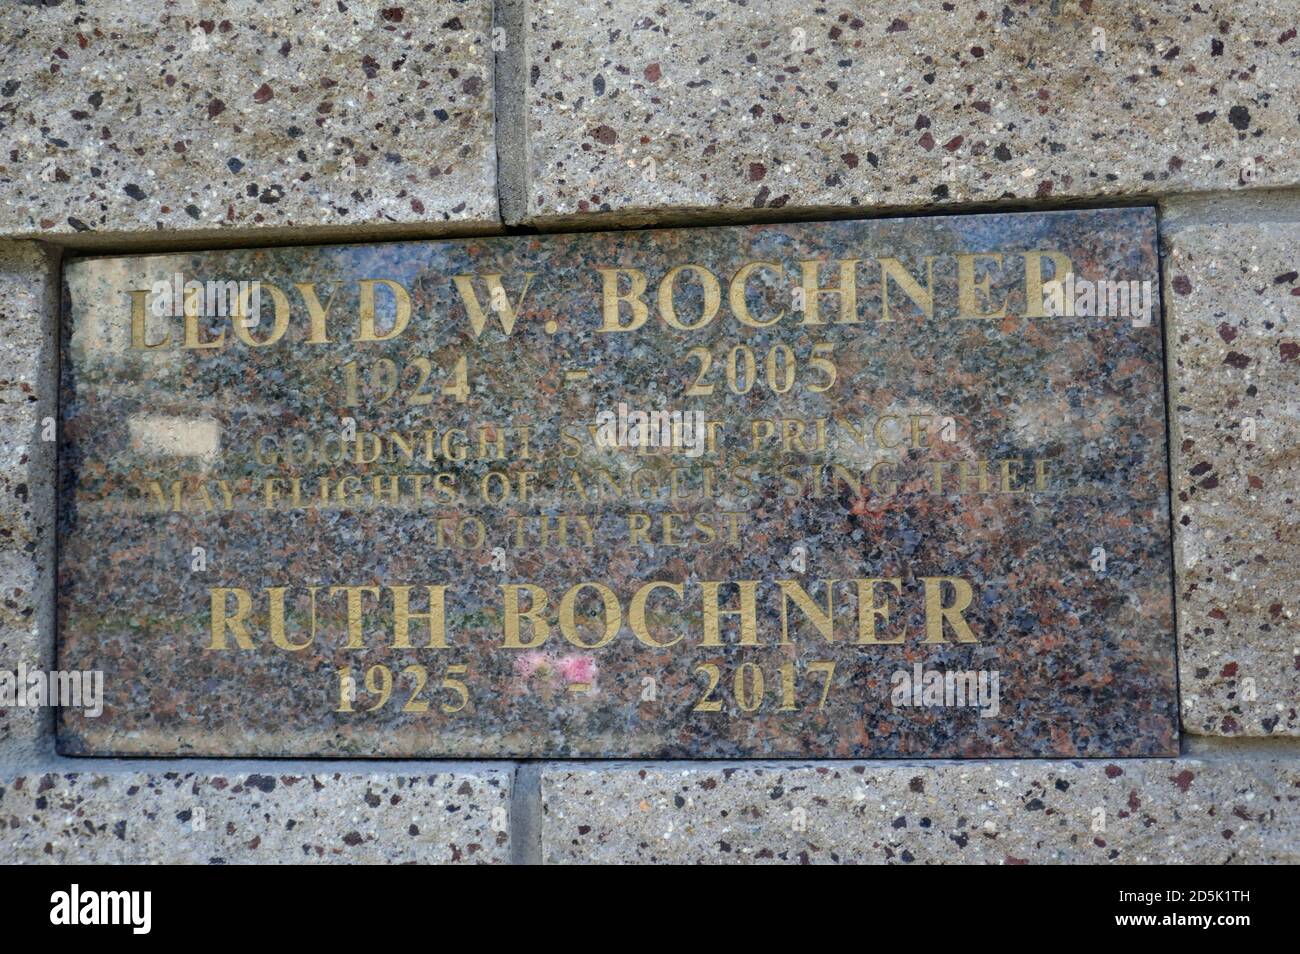 Los Angeles, California, USA 13th October 2020 A general view of atmosphere of actor Lloyd Bochner''s grave at Pierce Brothers Westwood Village Memorial Park on October 13, 2020 in Los Angeles, California, USA. Photo by Barry King/Alamy Stock Photo Stock Photo